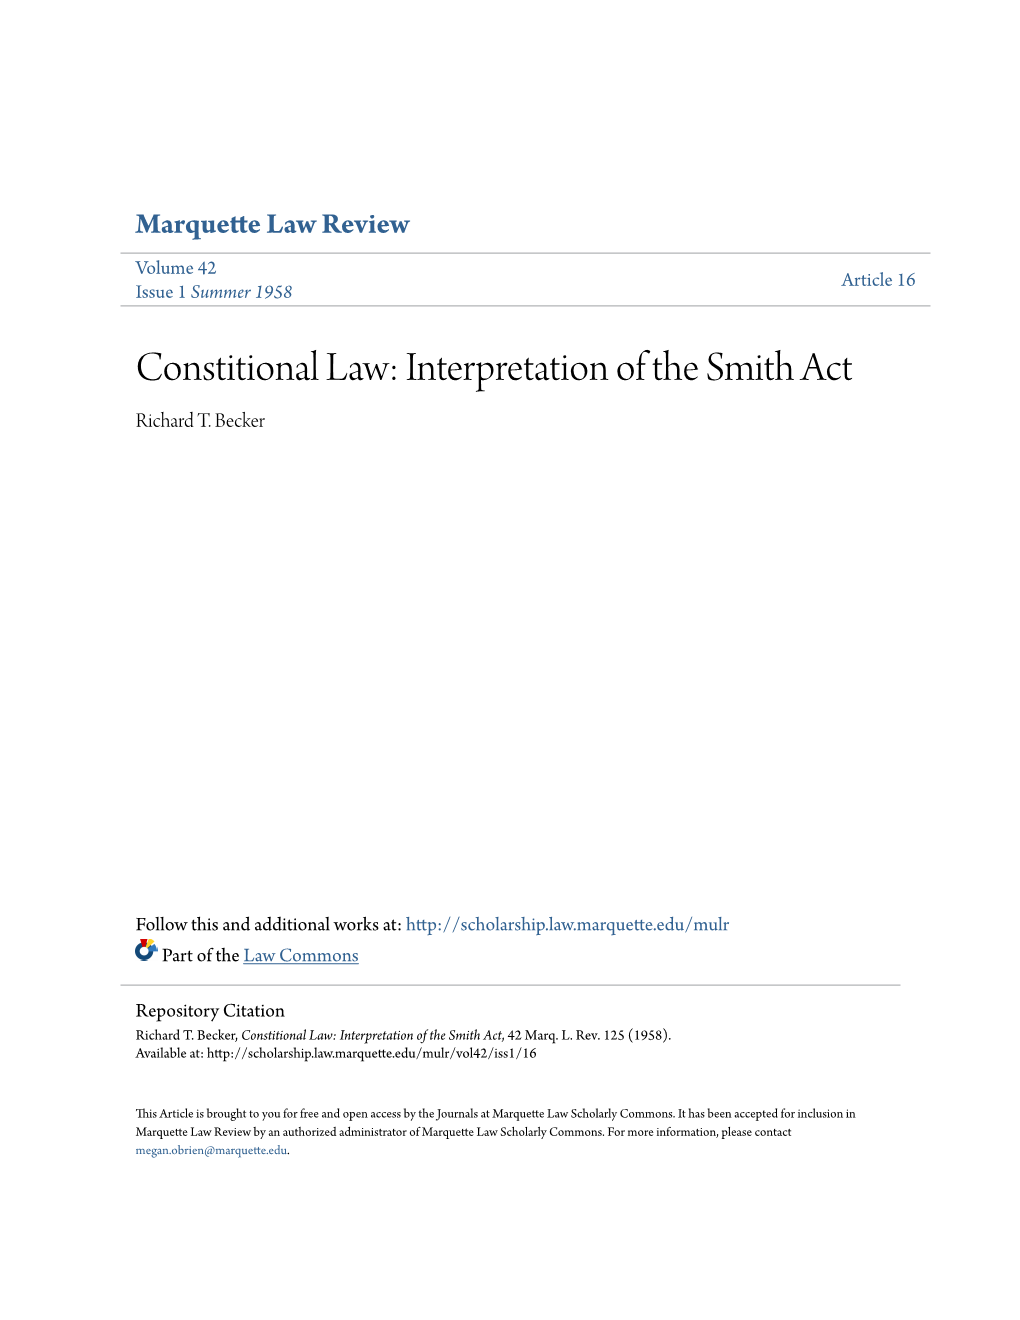 Constitional Law: Interpretation of the Smith Act Richard T